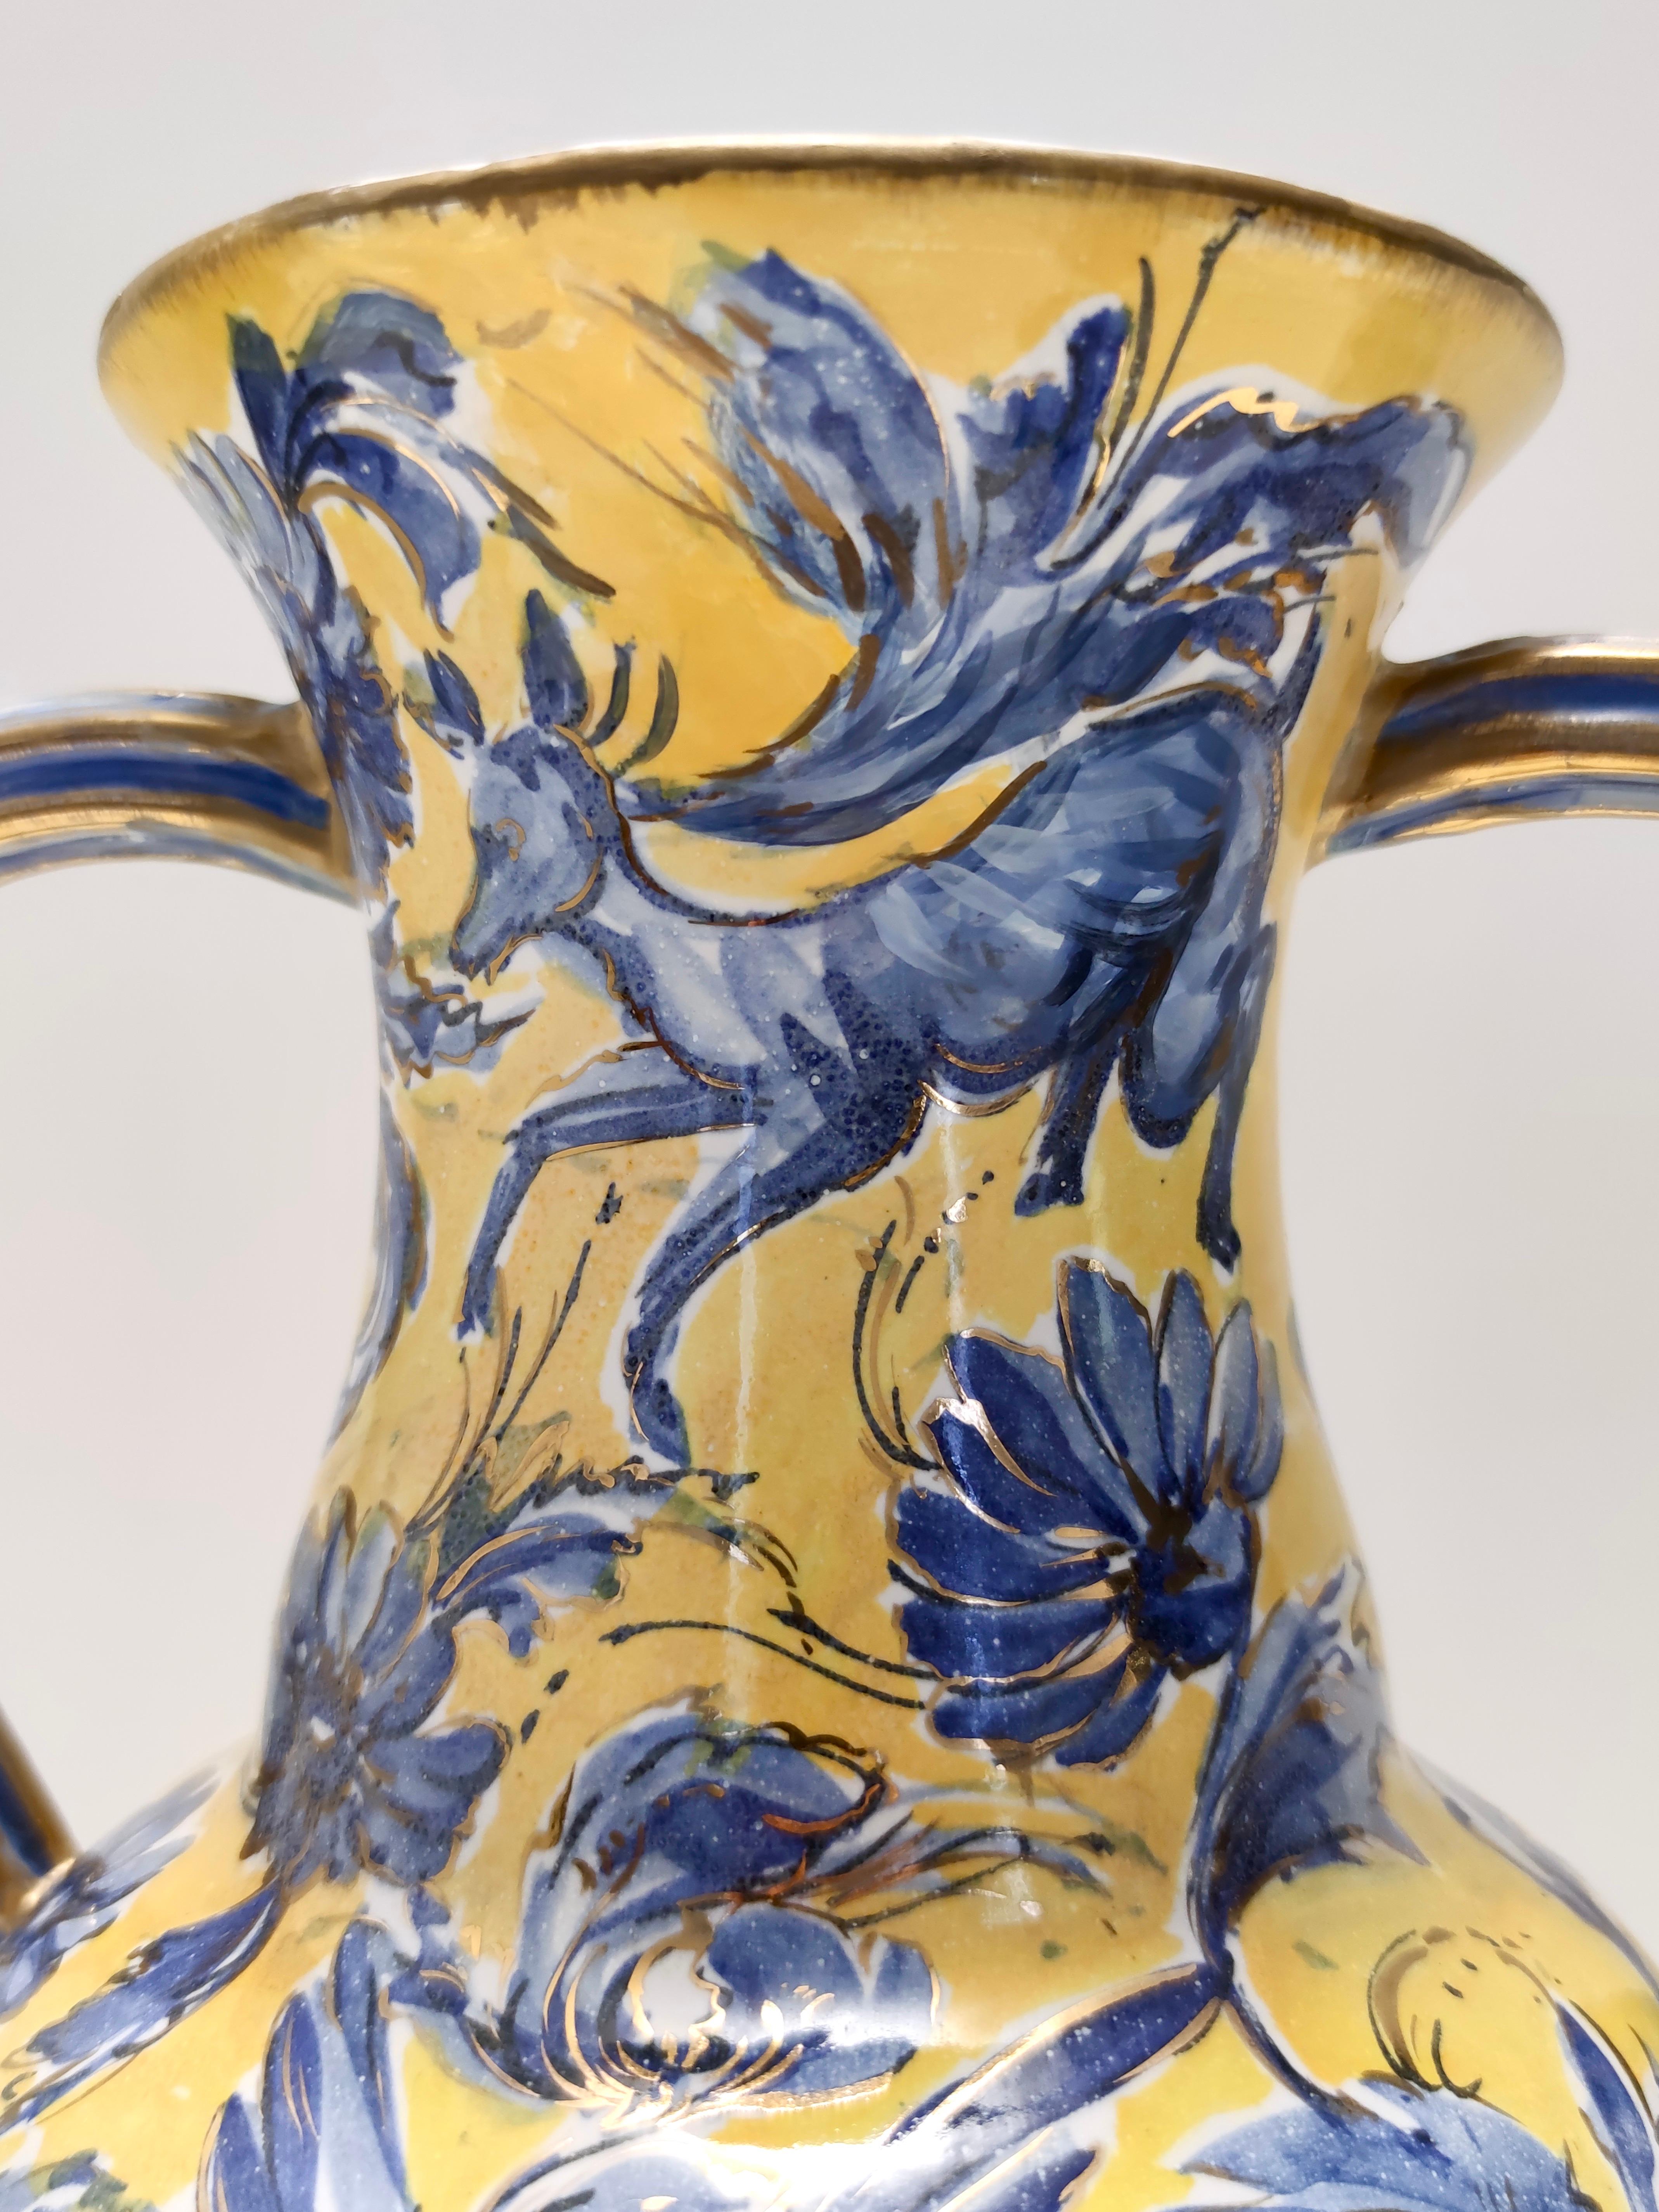 Vintage Handmade Yellow and Blue Glazed Ceramic Amphora by Zulimo Aretini, Italy For Sale 8